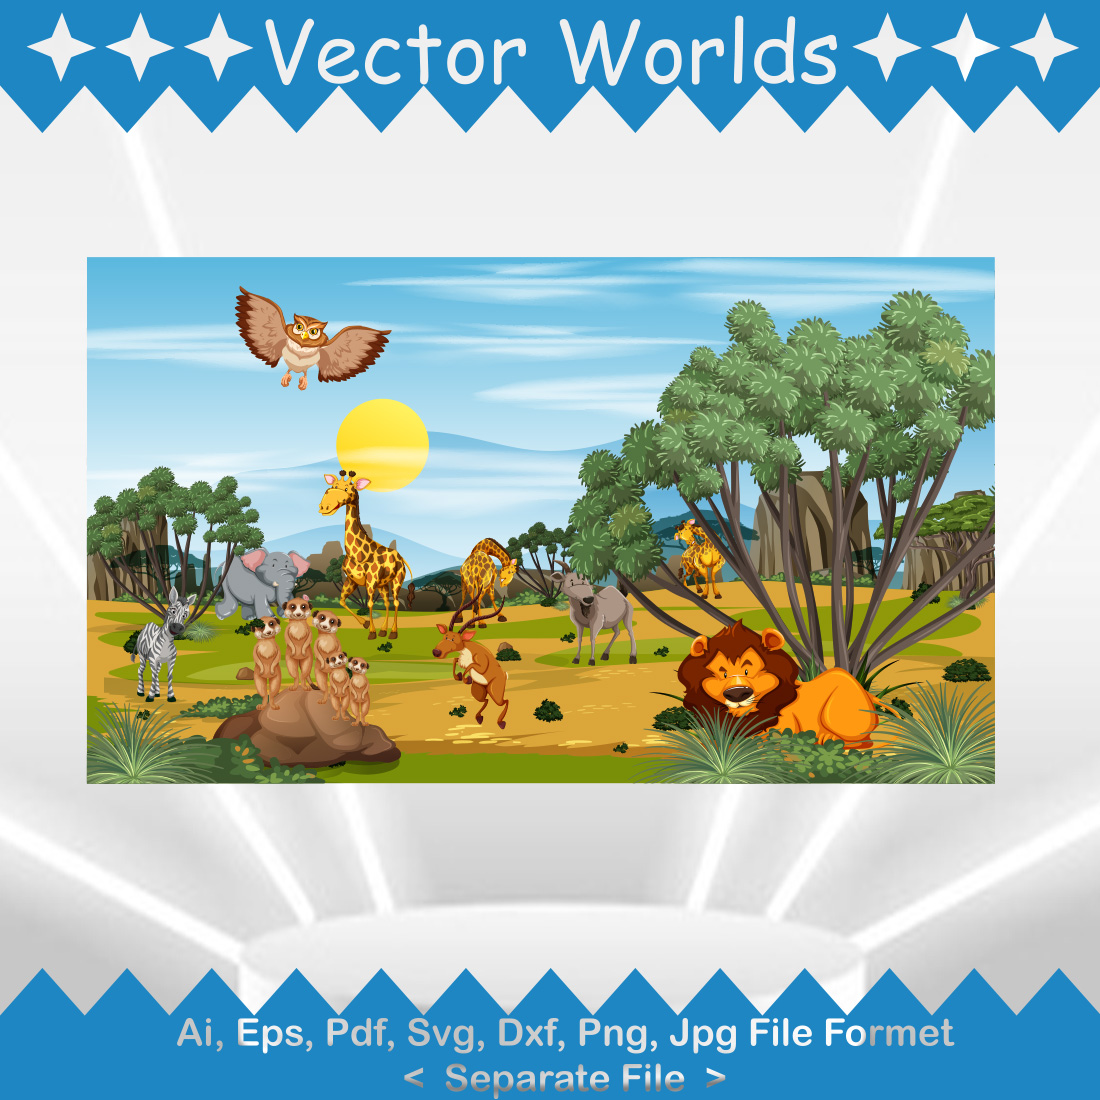 ZOO SVG Vector Design cover image.